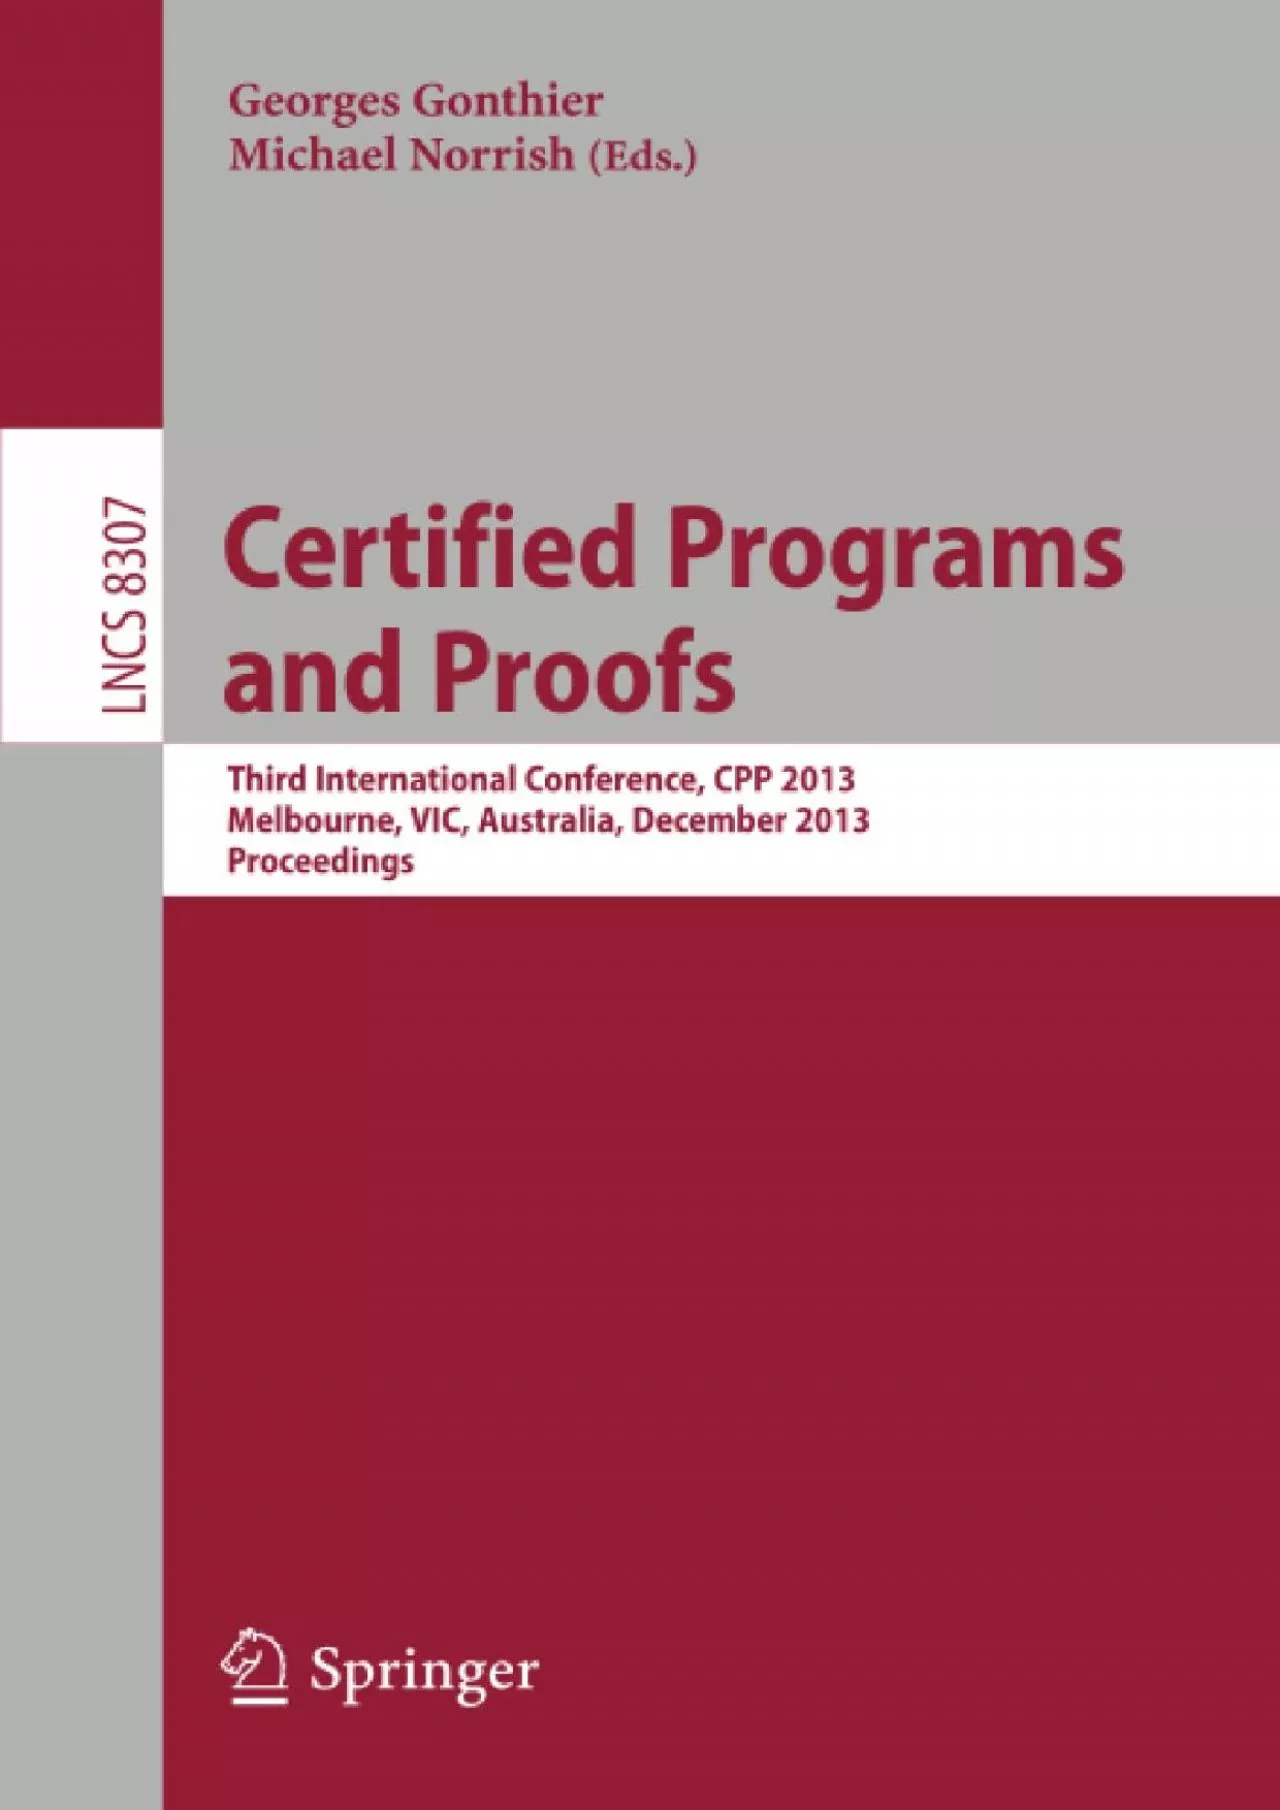 [BEST]-Certified Programs and Proofs: Third International Conference, CPP 2013, Melbourne,